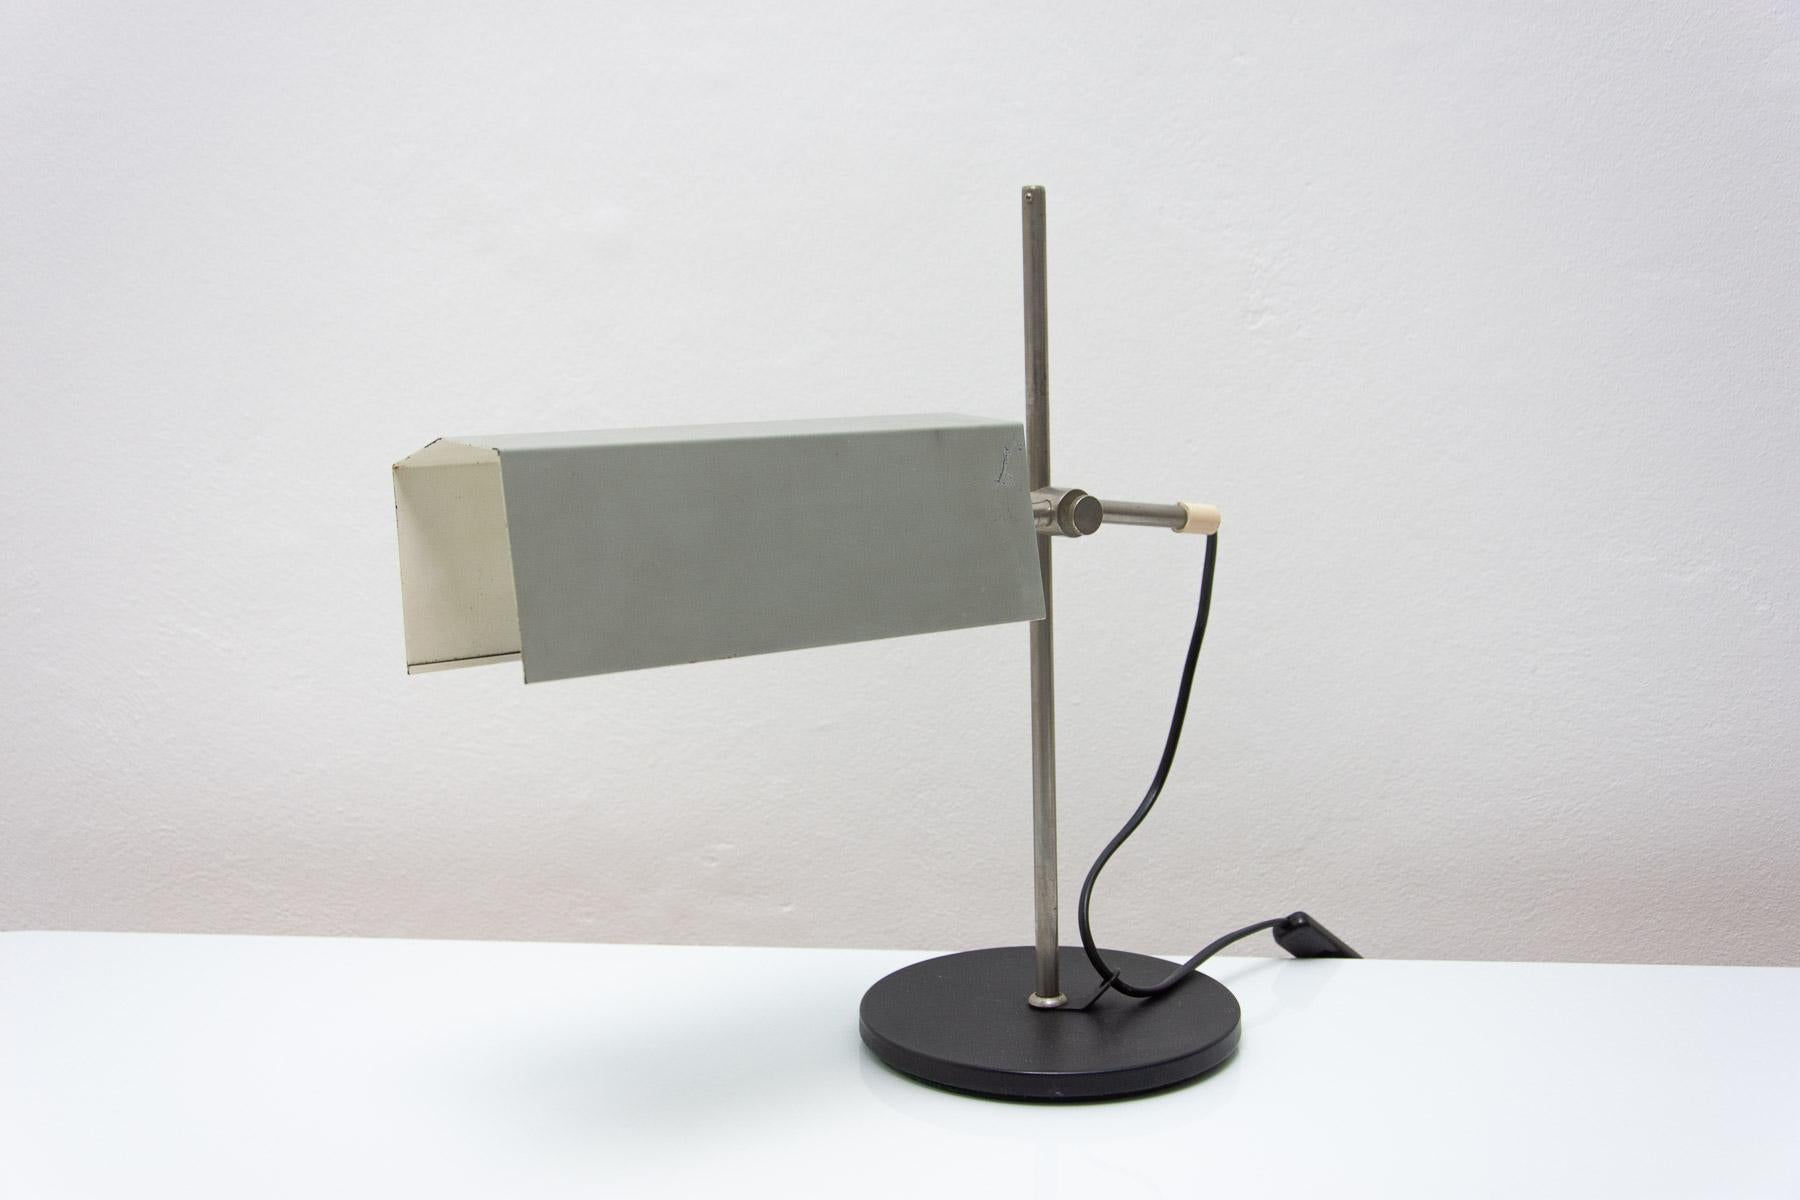 Midcentury desk lamp, associated with “Brussels period” and world-renowned EXPO58. It was made in the former Czechoslovakia in the 1960´s. Material: metal, aluminum, sheet metal.

Overall, it is in very good Vintage condition. New wiring

Works